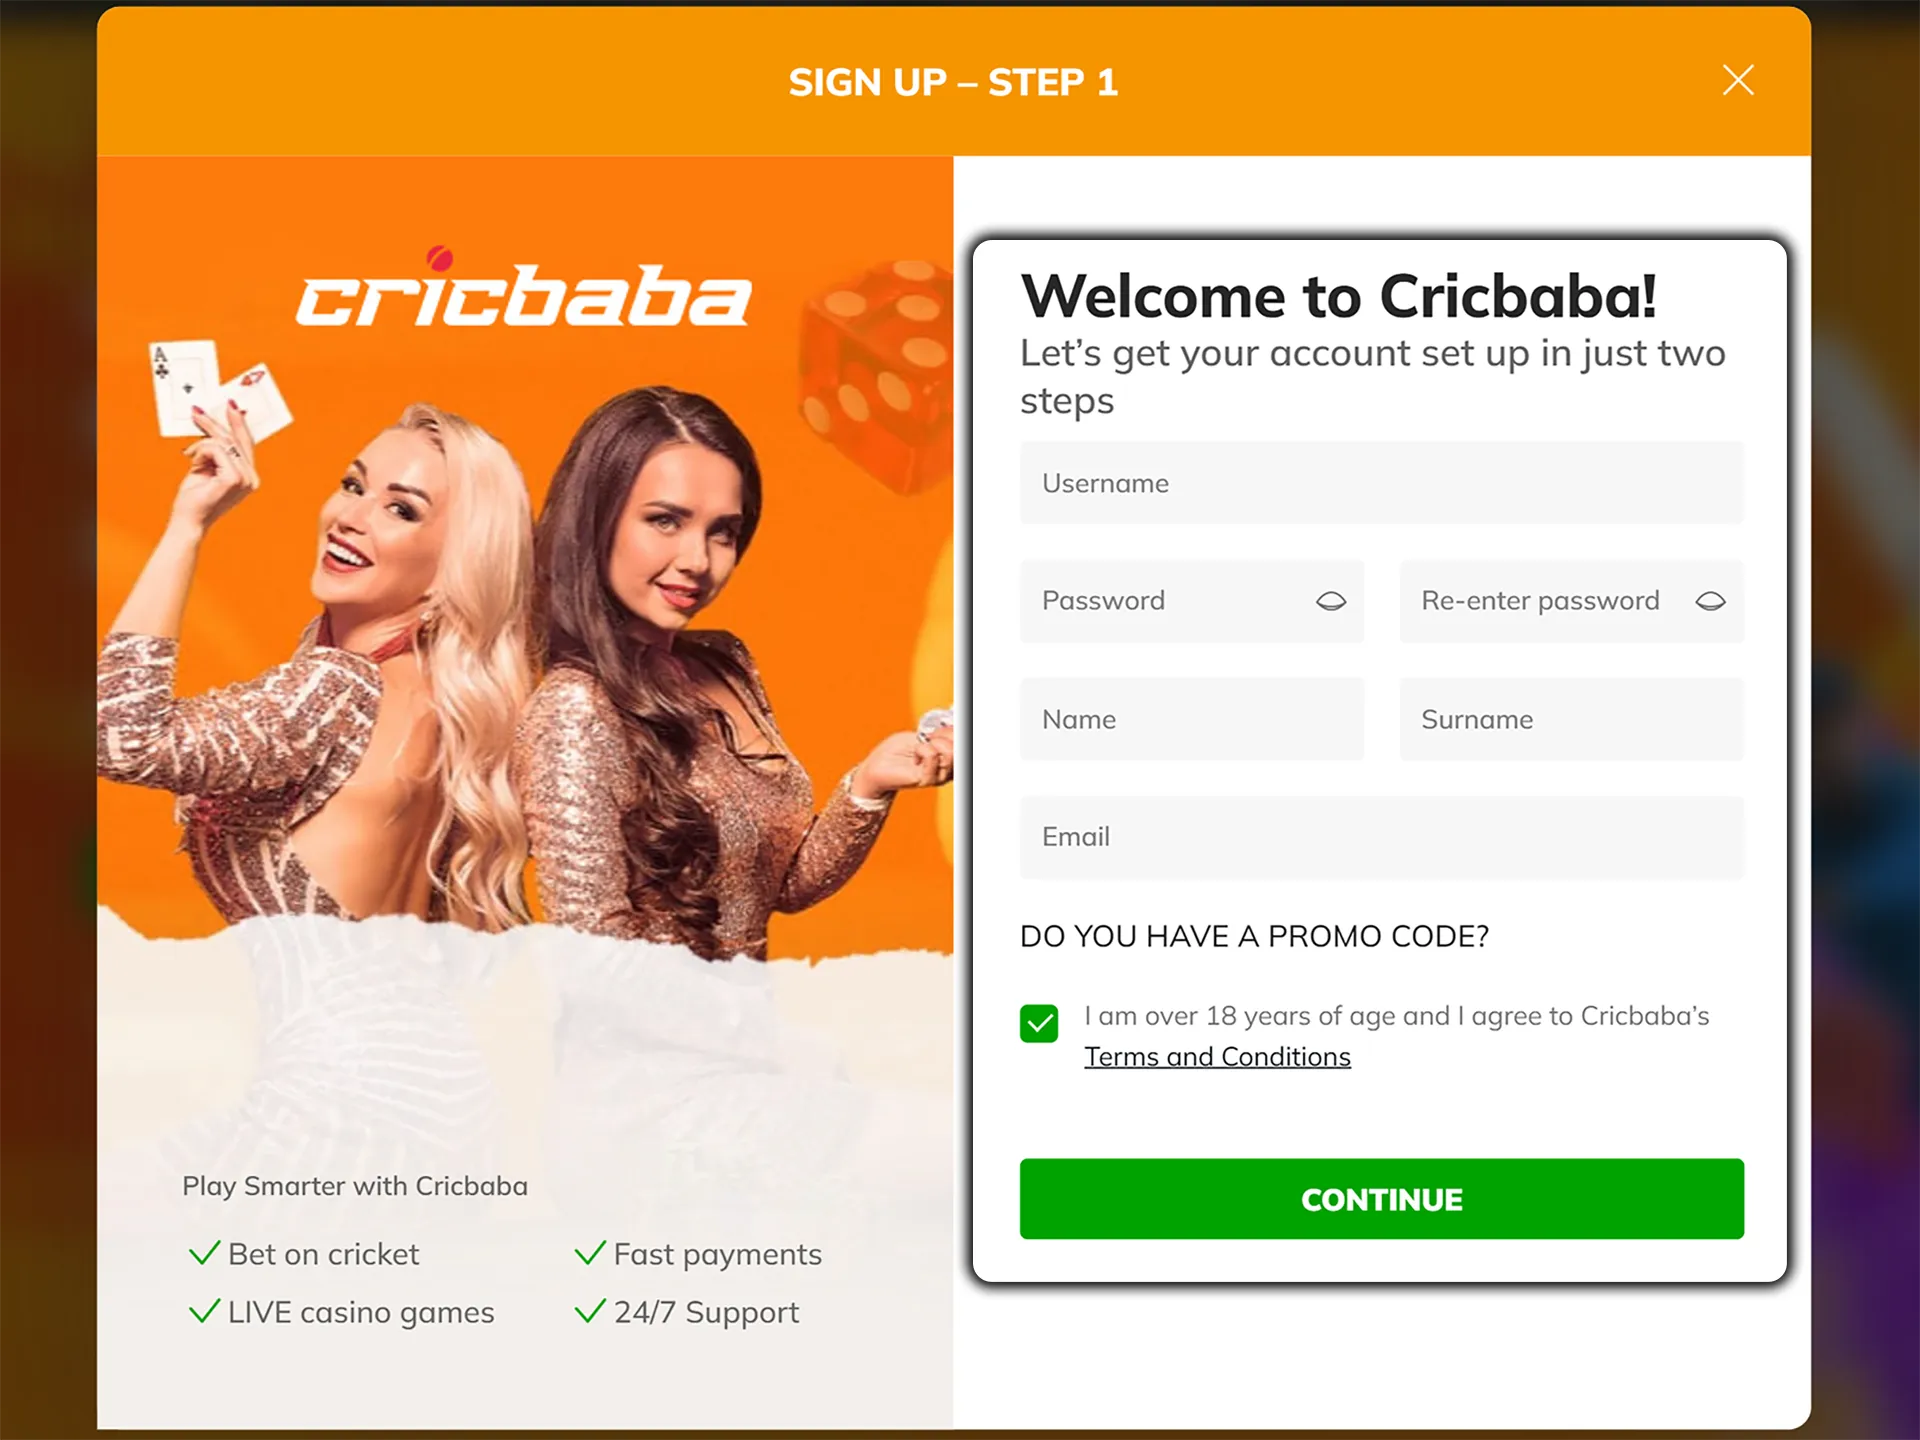 Go to the Cricbaba website and go through the account creation process.